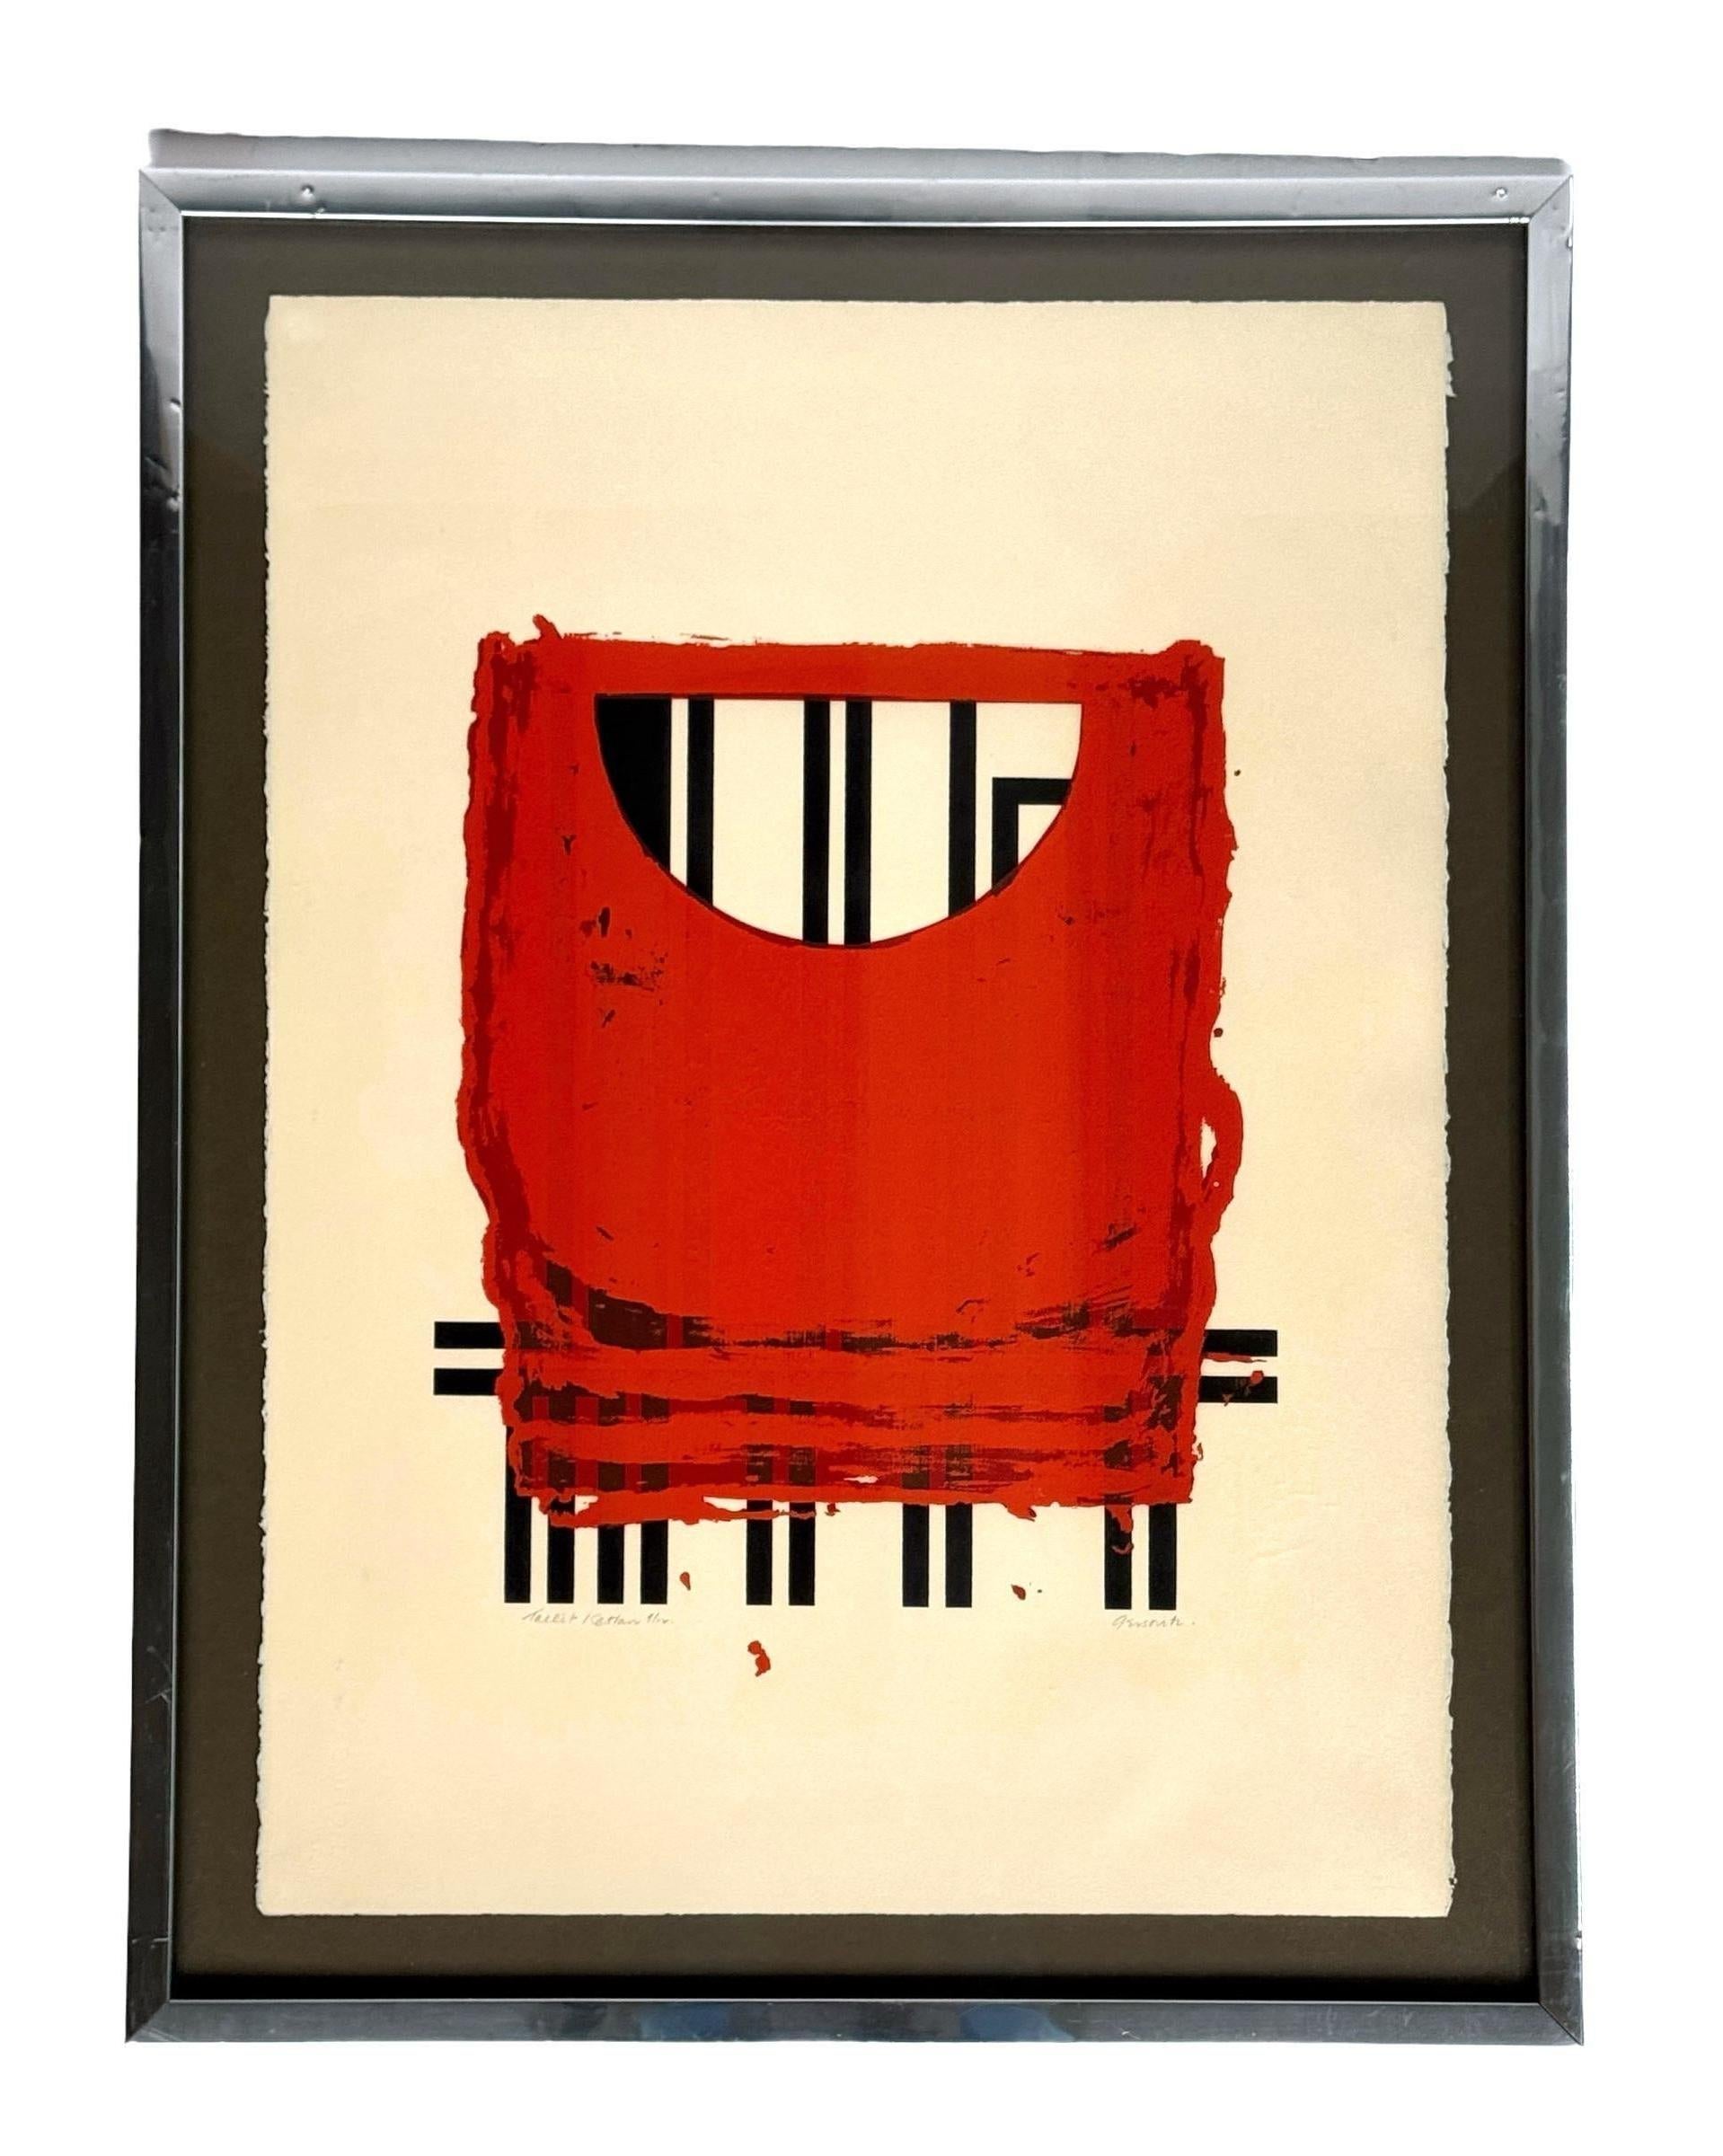 'Tallit Kattan' No. 9 /12, 1975,  Lithograph by Sarah V. Gersouitz 
Sarah V. Gersovitz (Canadian, 20th) 
Color Lithograph on woven paper
Titled 'Tallit Kattan'. 
Pencil signed in lower right. 
Hand-titled and numbered (9/12) in lower left. 
In a